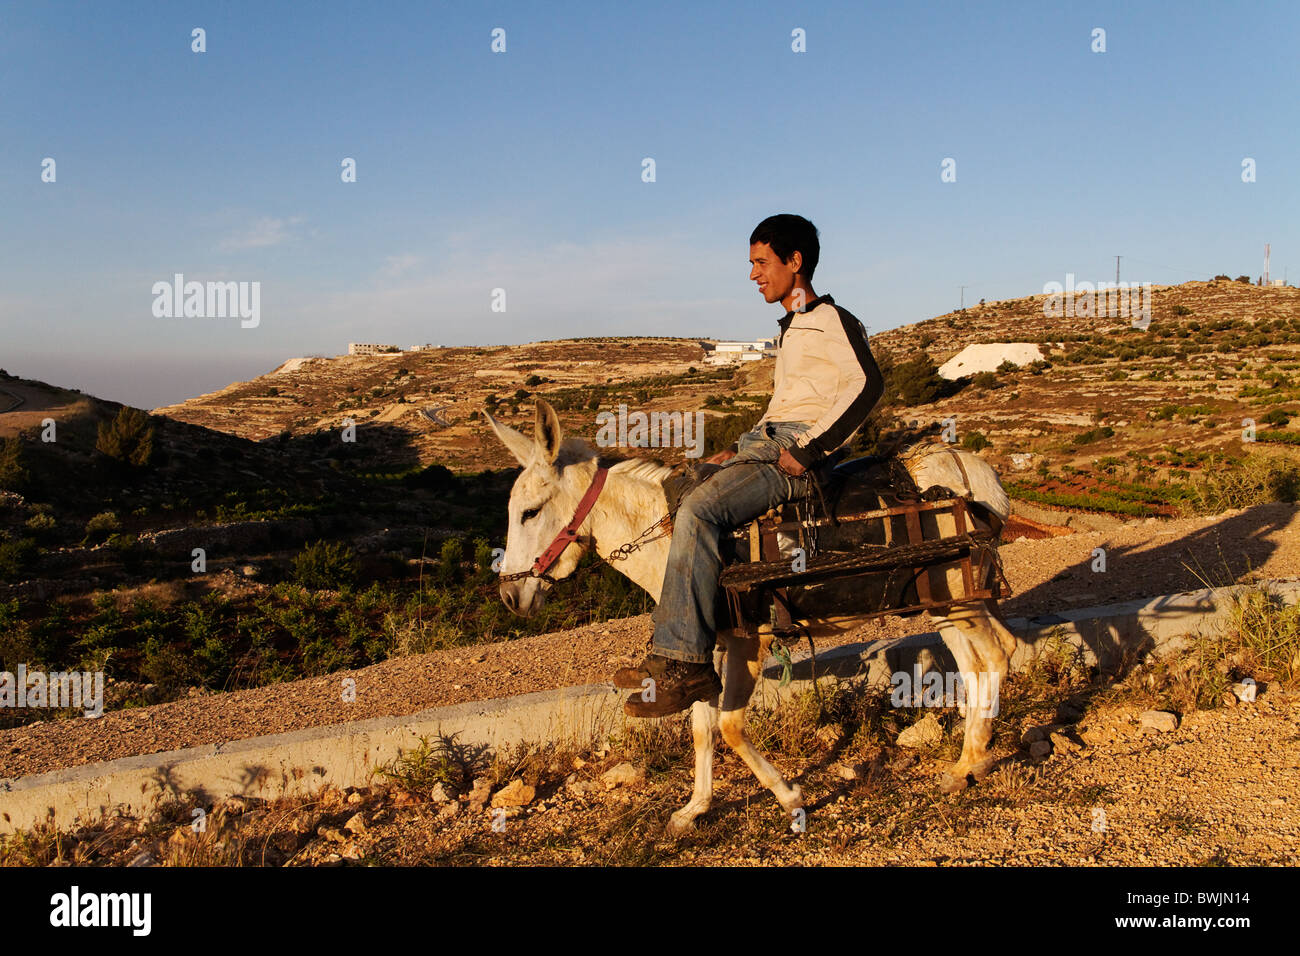 A Palestinian shepherd on a donkey coming back from pasture. Stock Photo